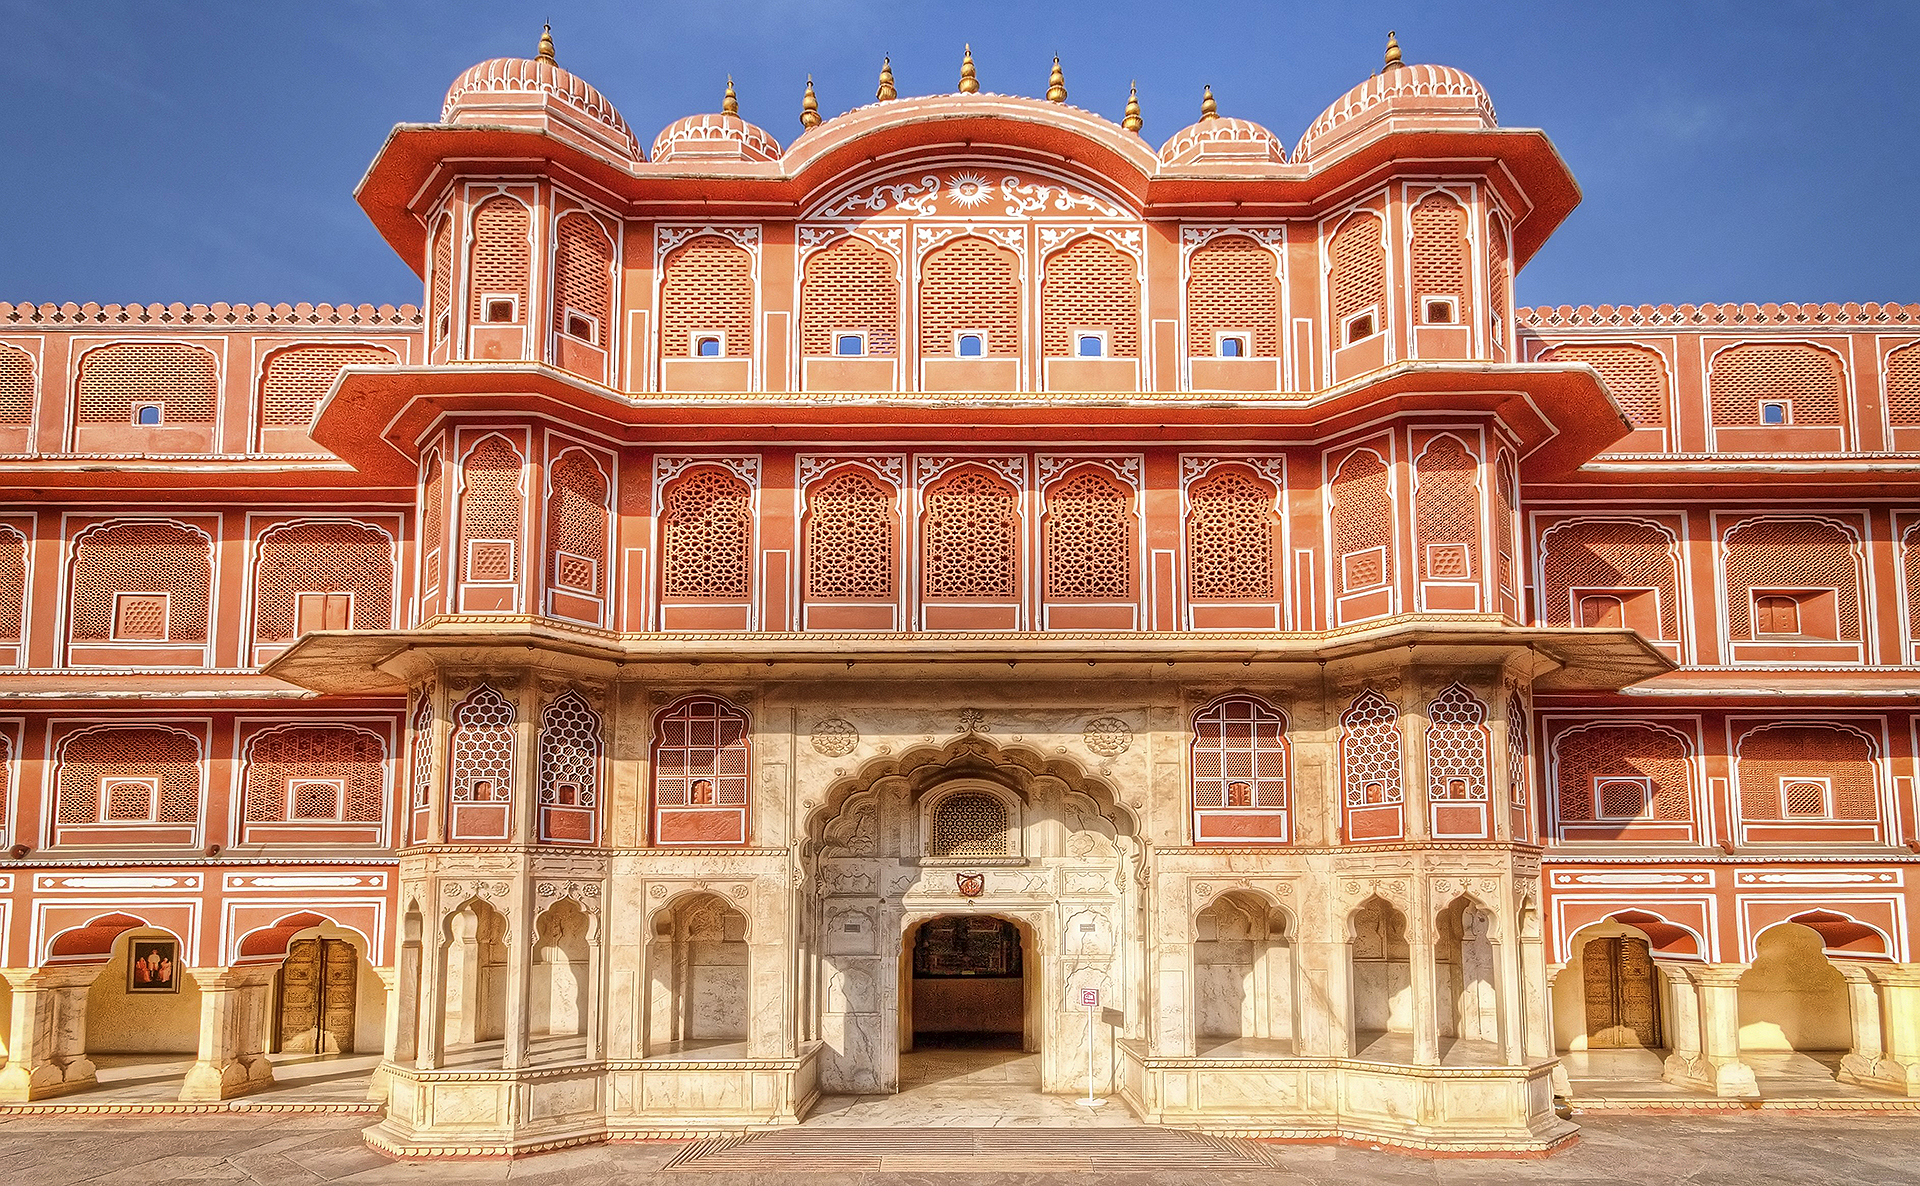 The "Pink City" of Jaipur